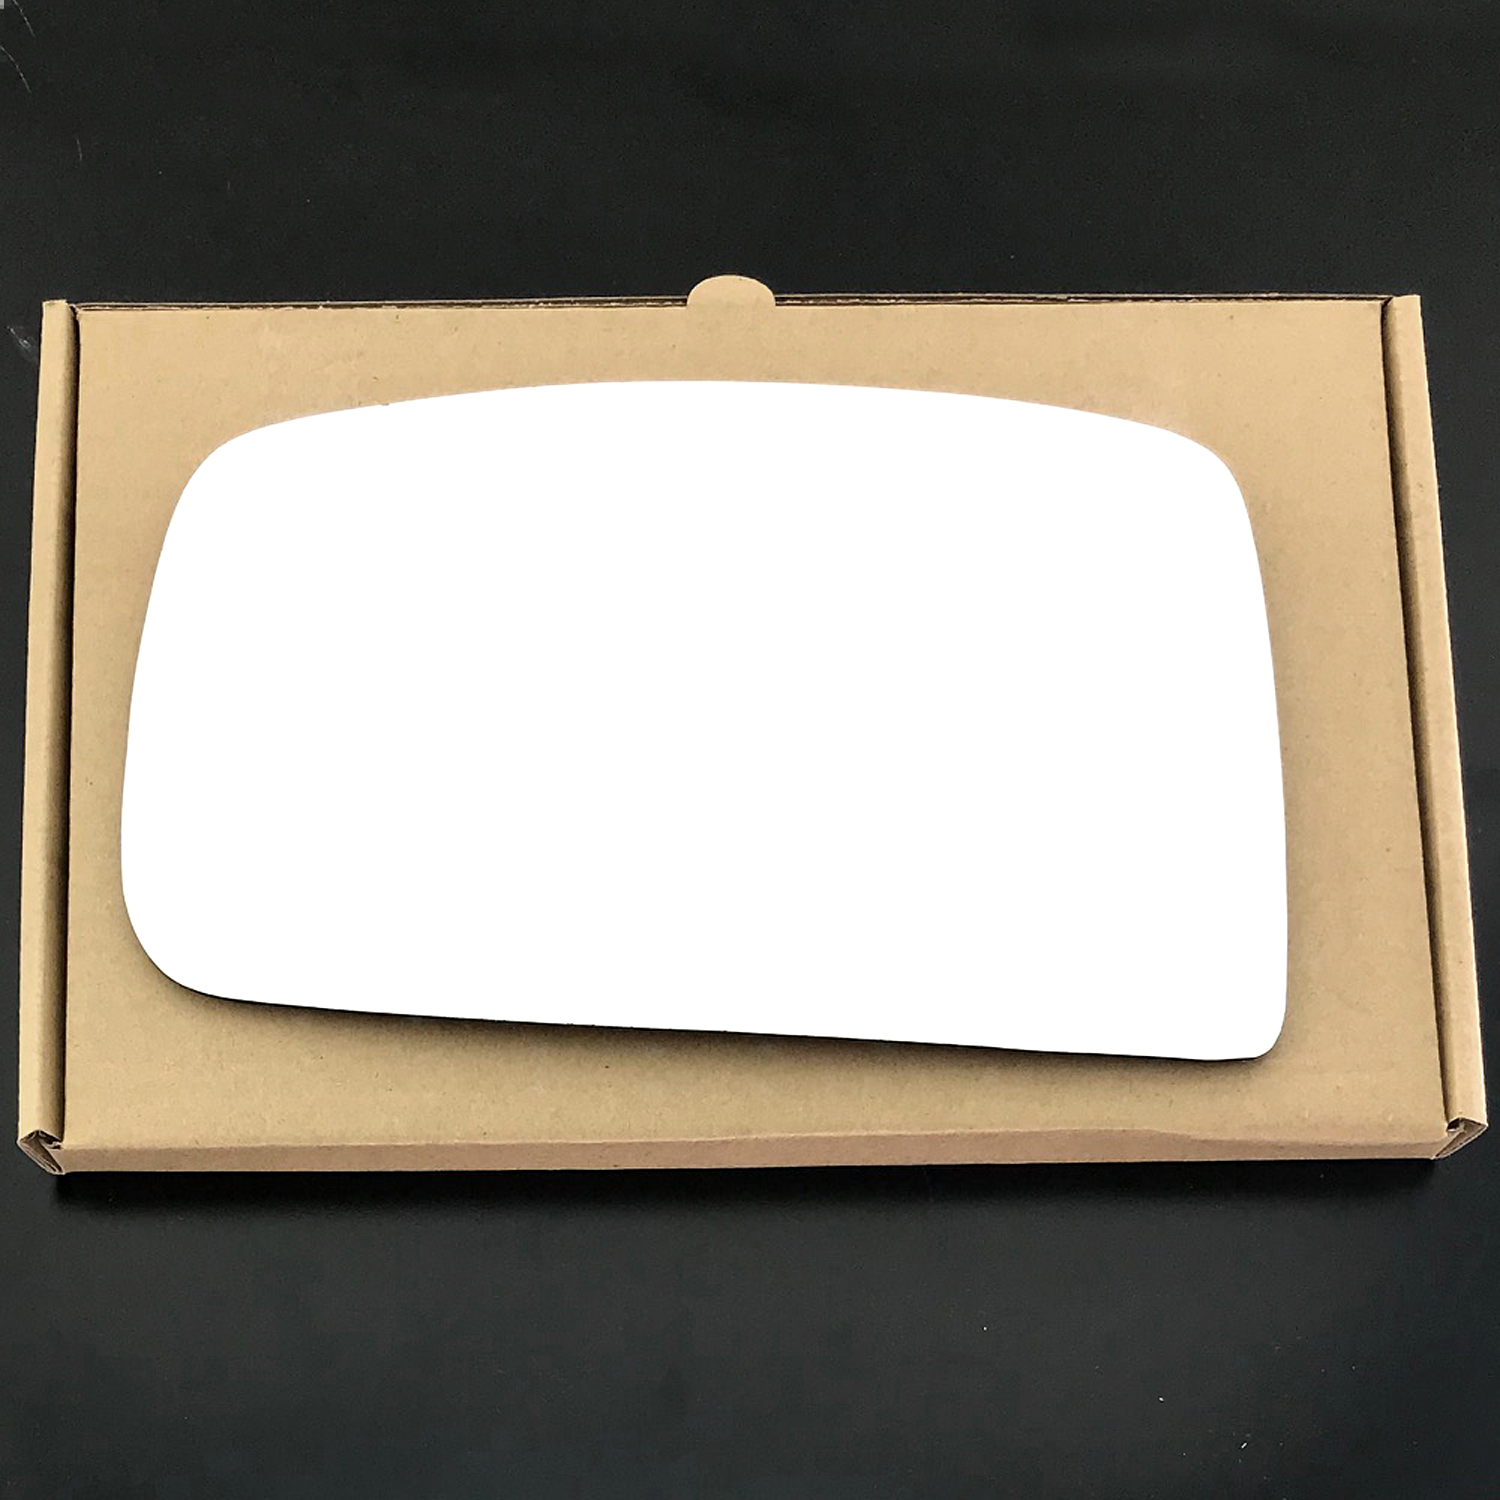 LDV Maxus Wing Mirror Glass RIGHT HAND ( UK Driver Side ) 2007 to 2018 – Convex Wing Mirror